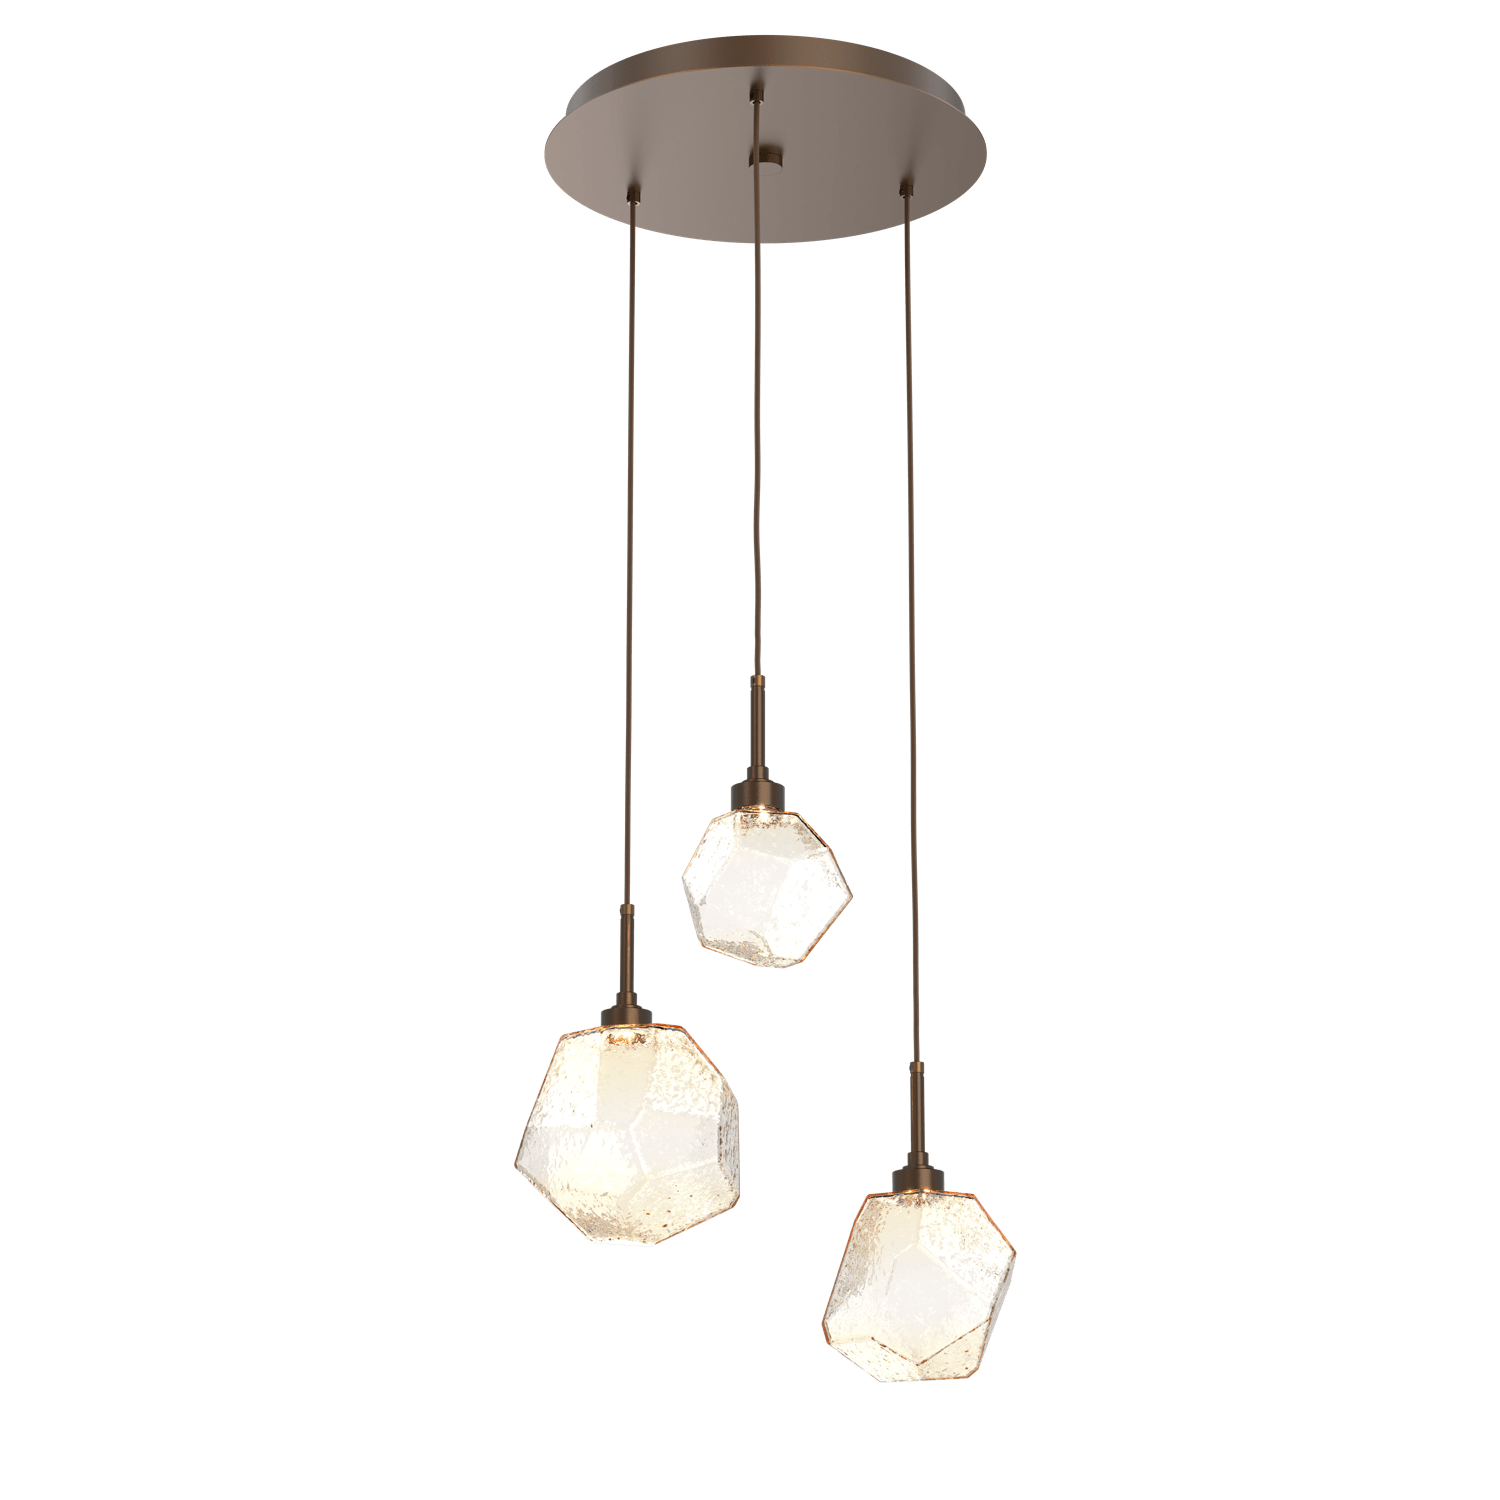 CHB0039-03-FB-A-Hammerton-Studio-Gem-3-light-round-pendant-chandelier-with-flat-bronze-finish-and-amber-blown-glass-shades-and-LED-lamping